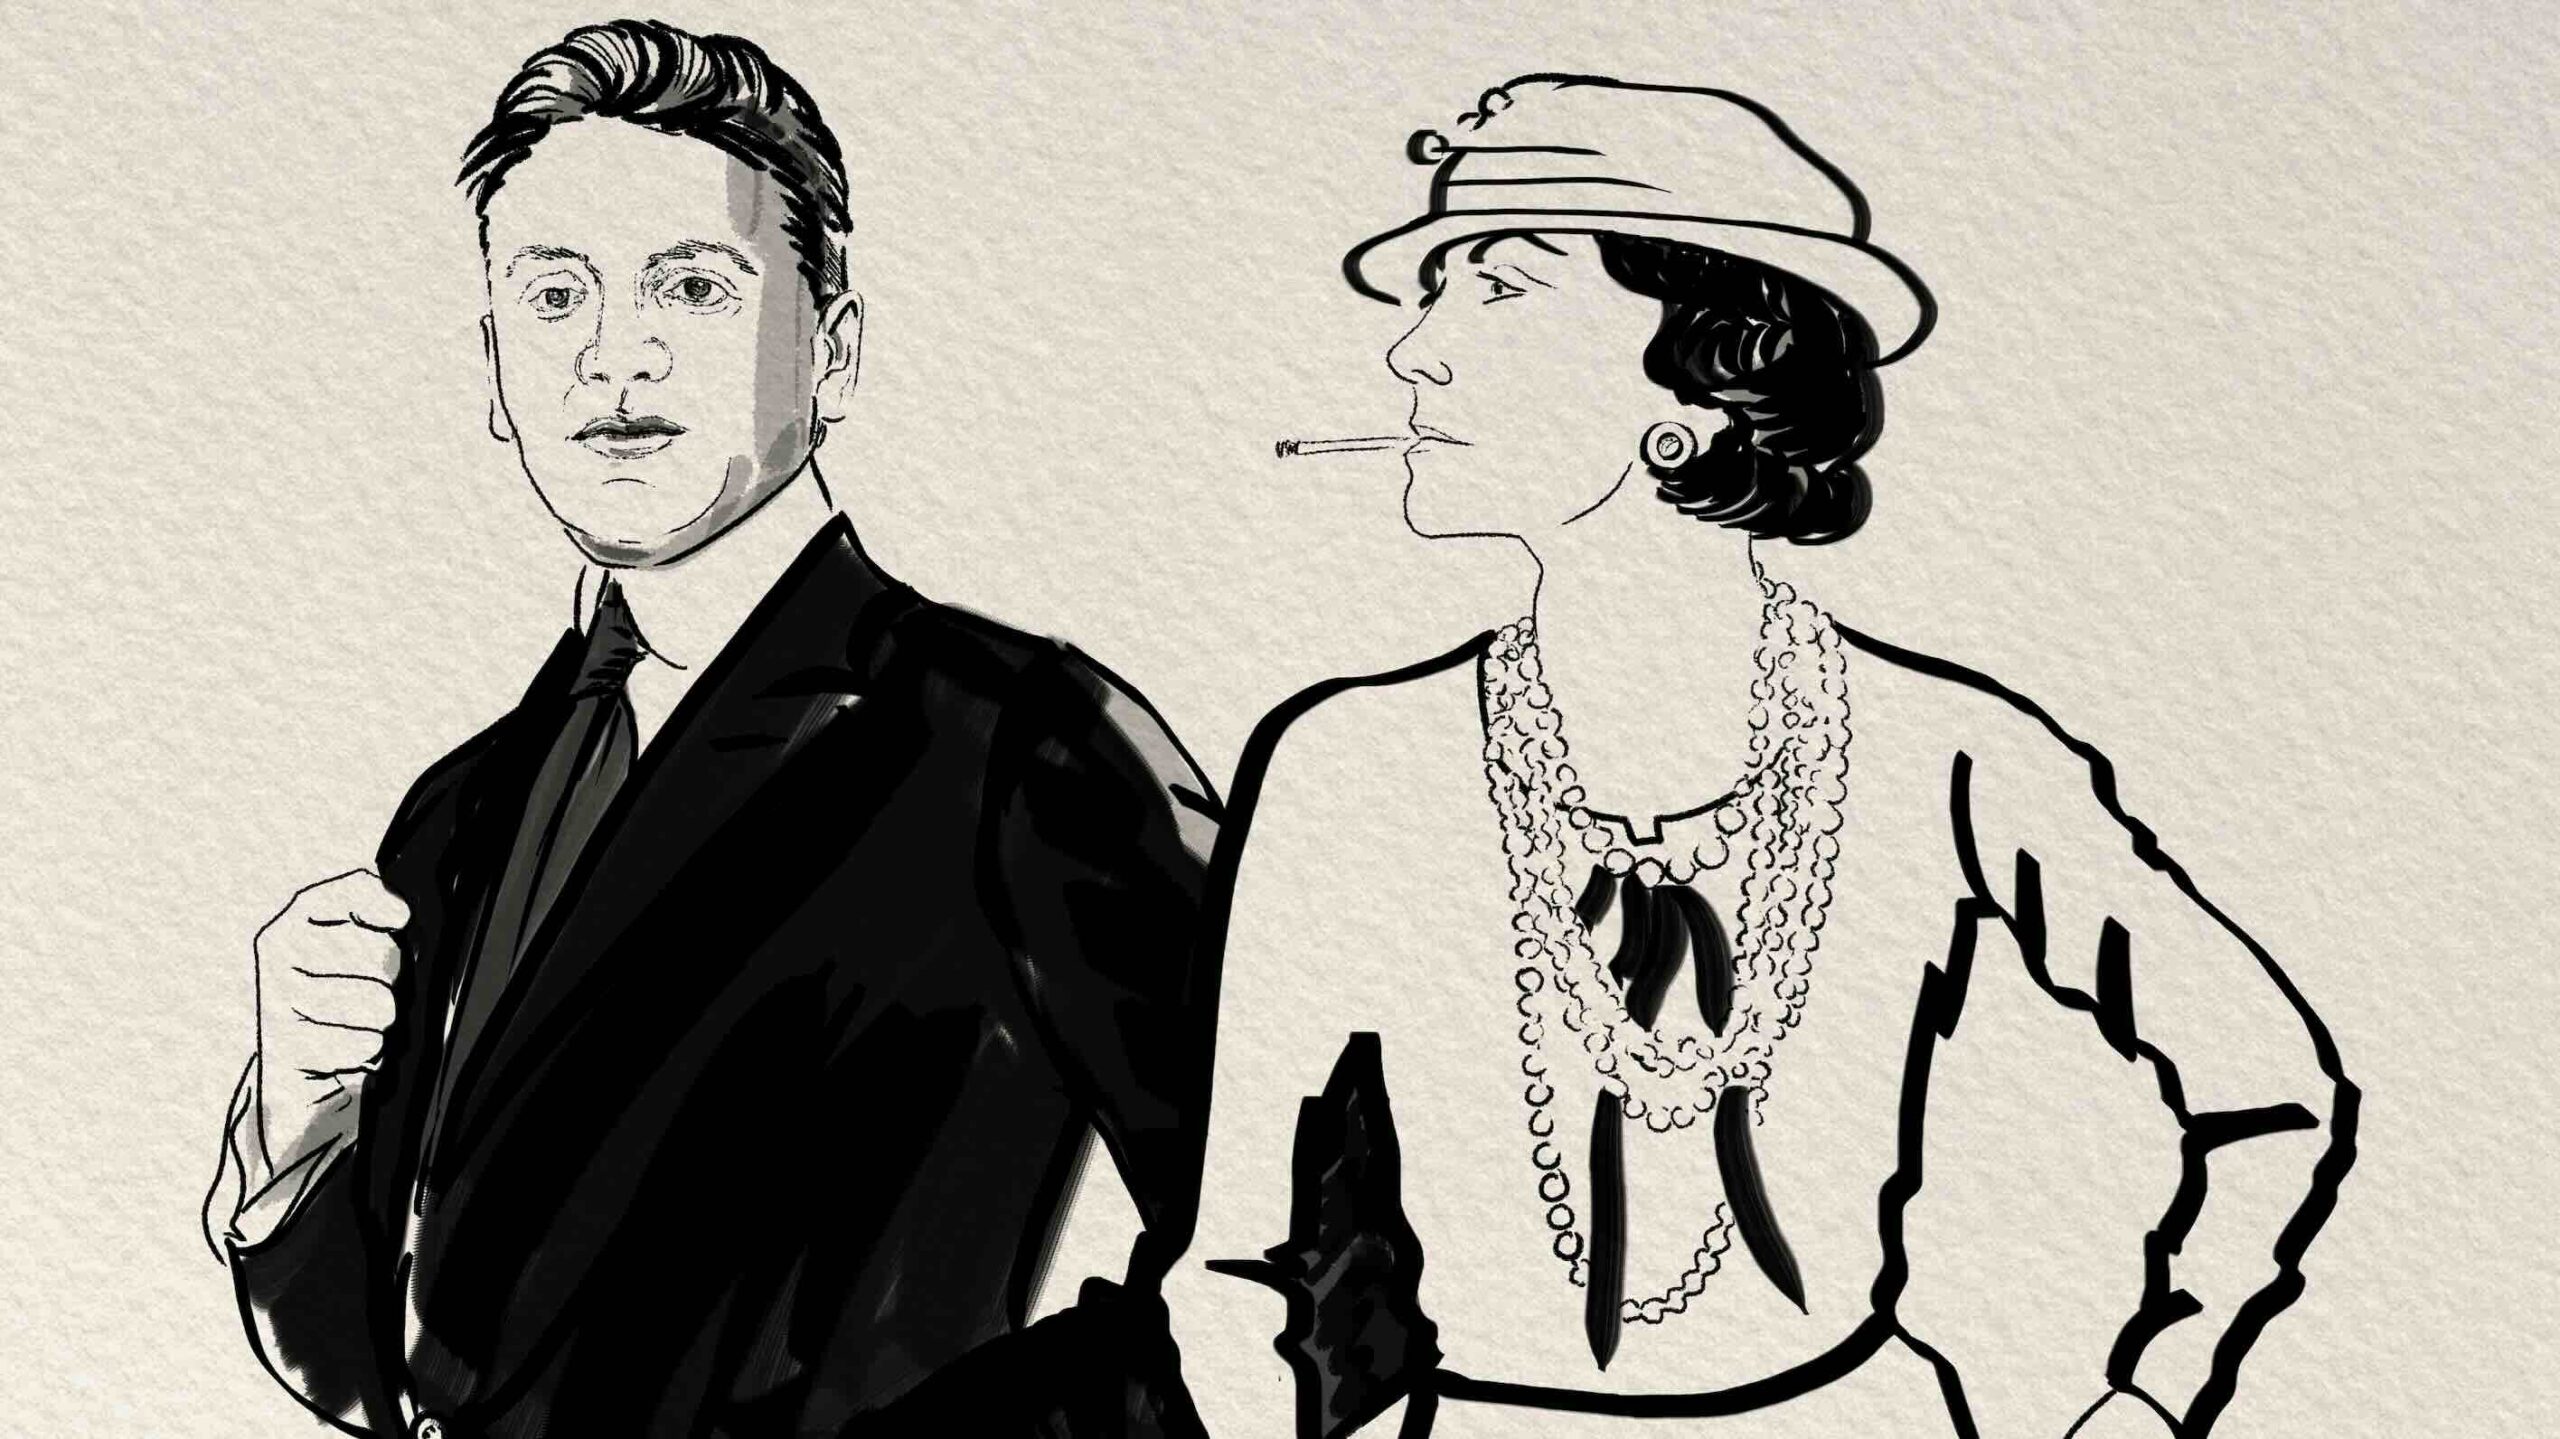 Coco Chanel and Ernest Beaux Cartoon by German Vizulis